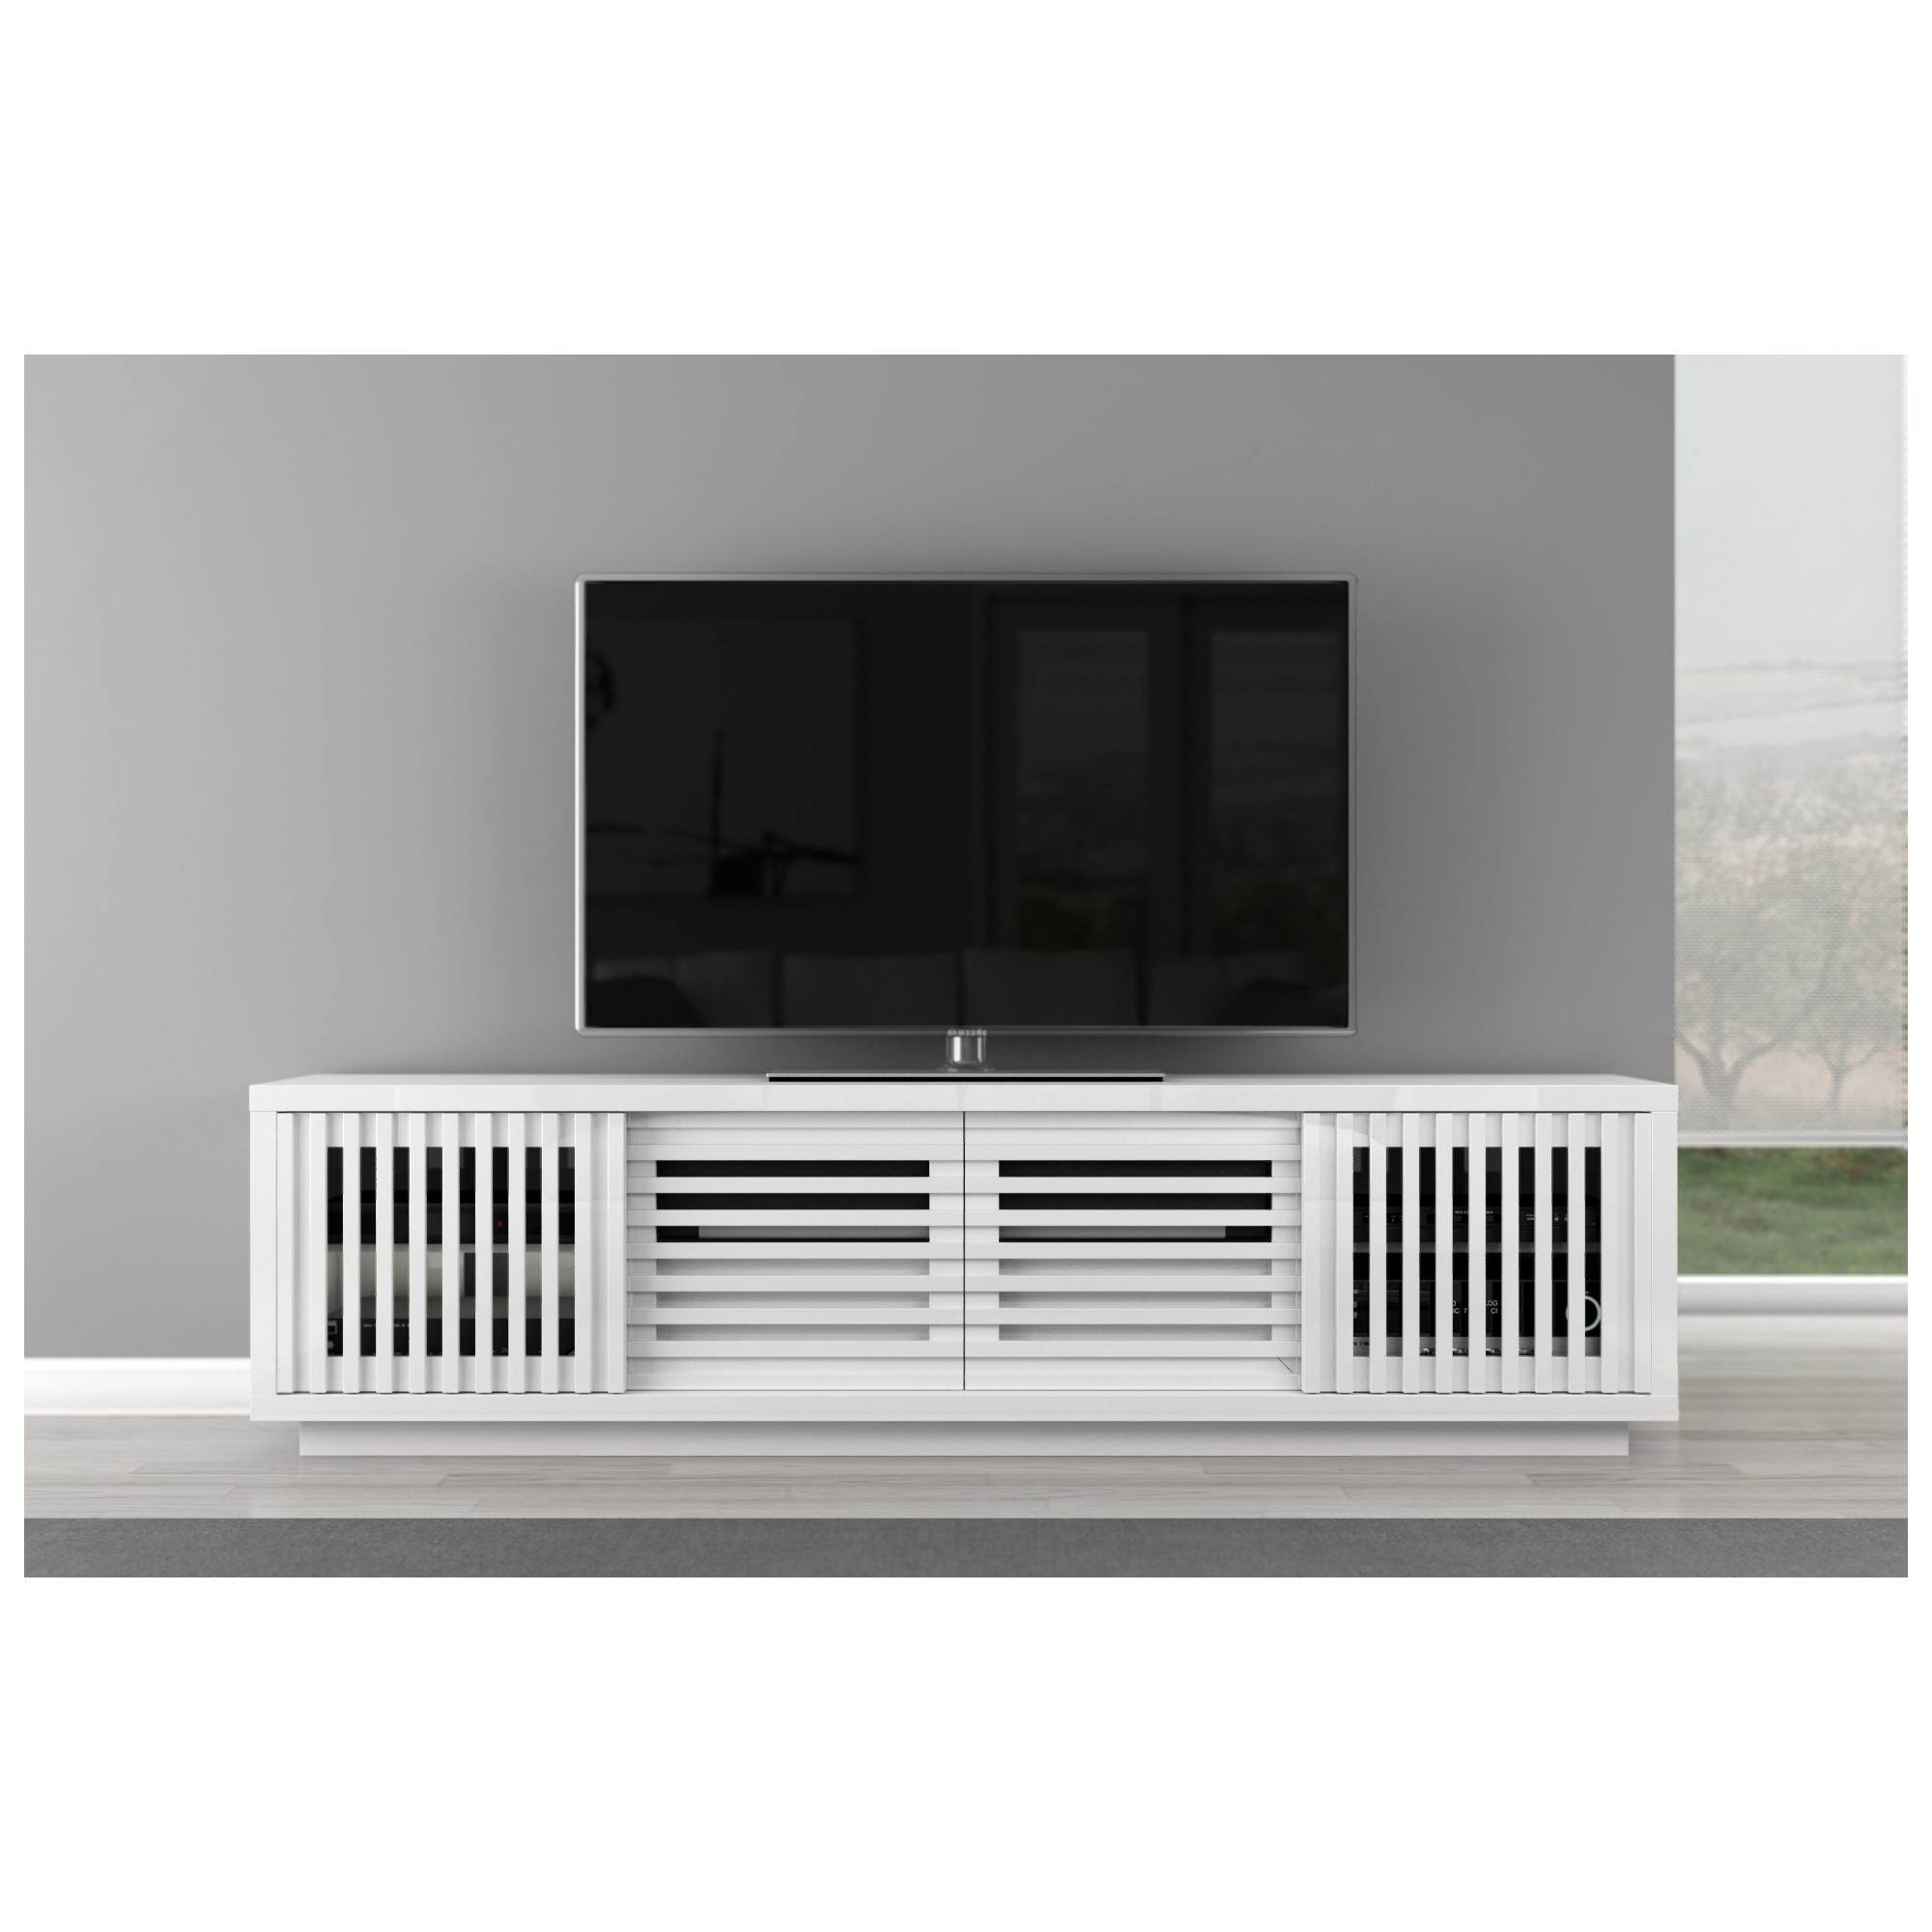 Furnitech Ft82ws Lw 82 Tv Stand Contemporary Media Cabinet In